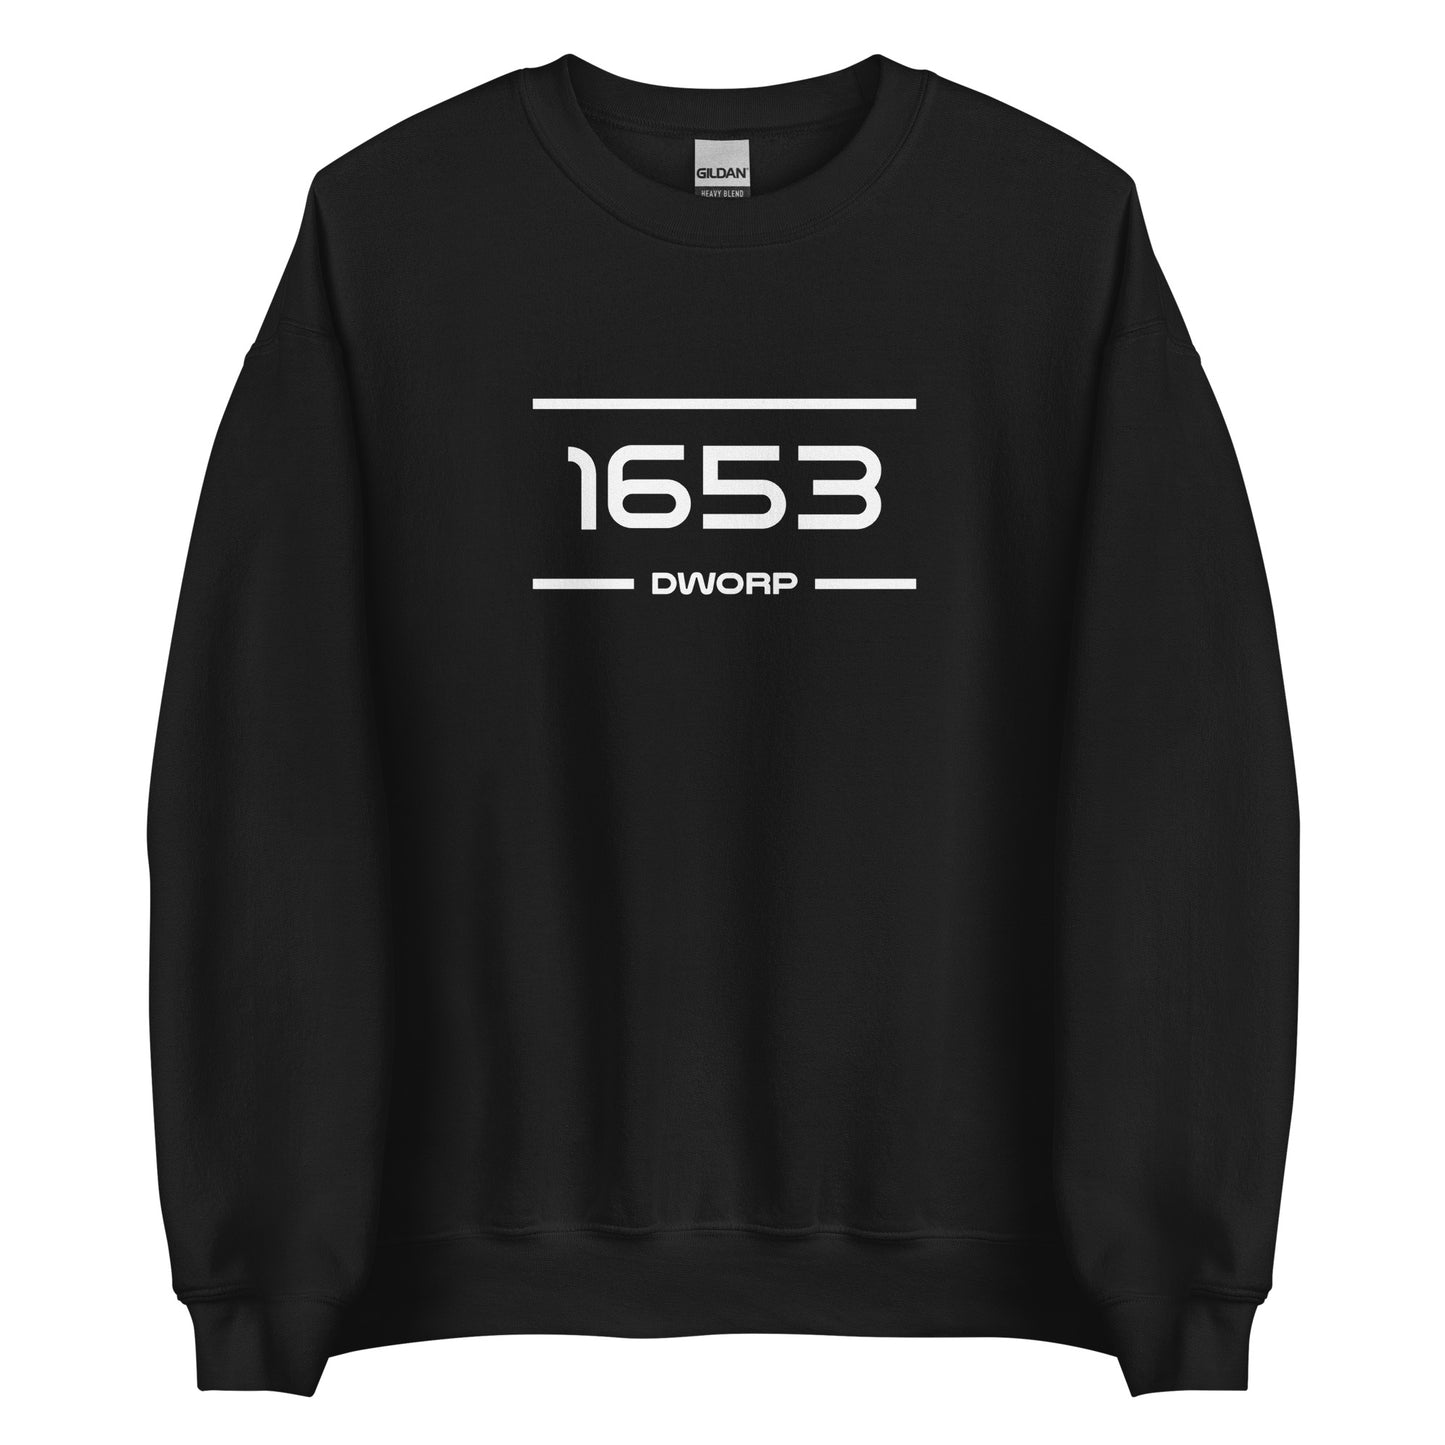 Sweater - 1653 - Dworp (M/V)